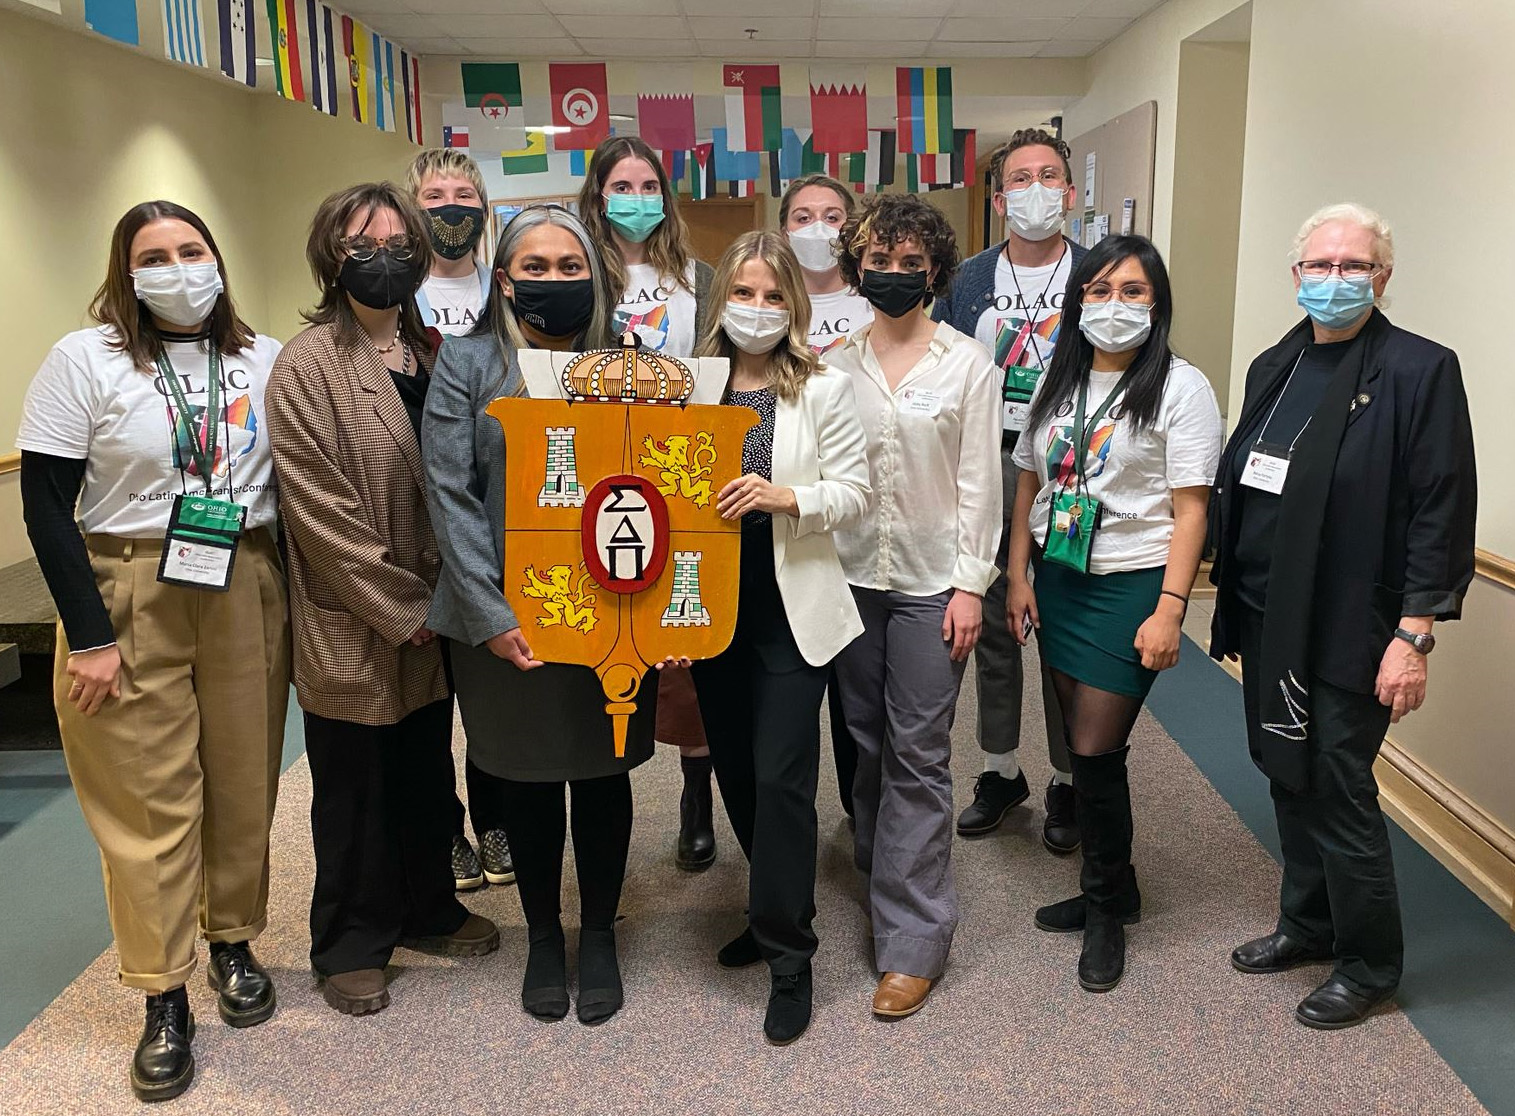 Sigma Delta Pi sponsors the OLAC pizza party and creative readings in 2022, masks still in place. Bottom row from left: María Clara Zanini, Carrie Summerford, Jafet Ix, Grace Weisel, Abby Neff, Diana Contreras, and Dr. Betsy Partyka. Back row from left: Regan Burridge, Paige Wilson, Suzy Aftabizadeh, and Agustín Klaric.